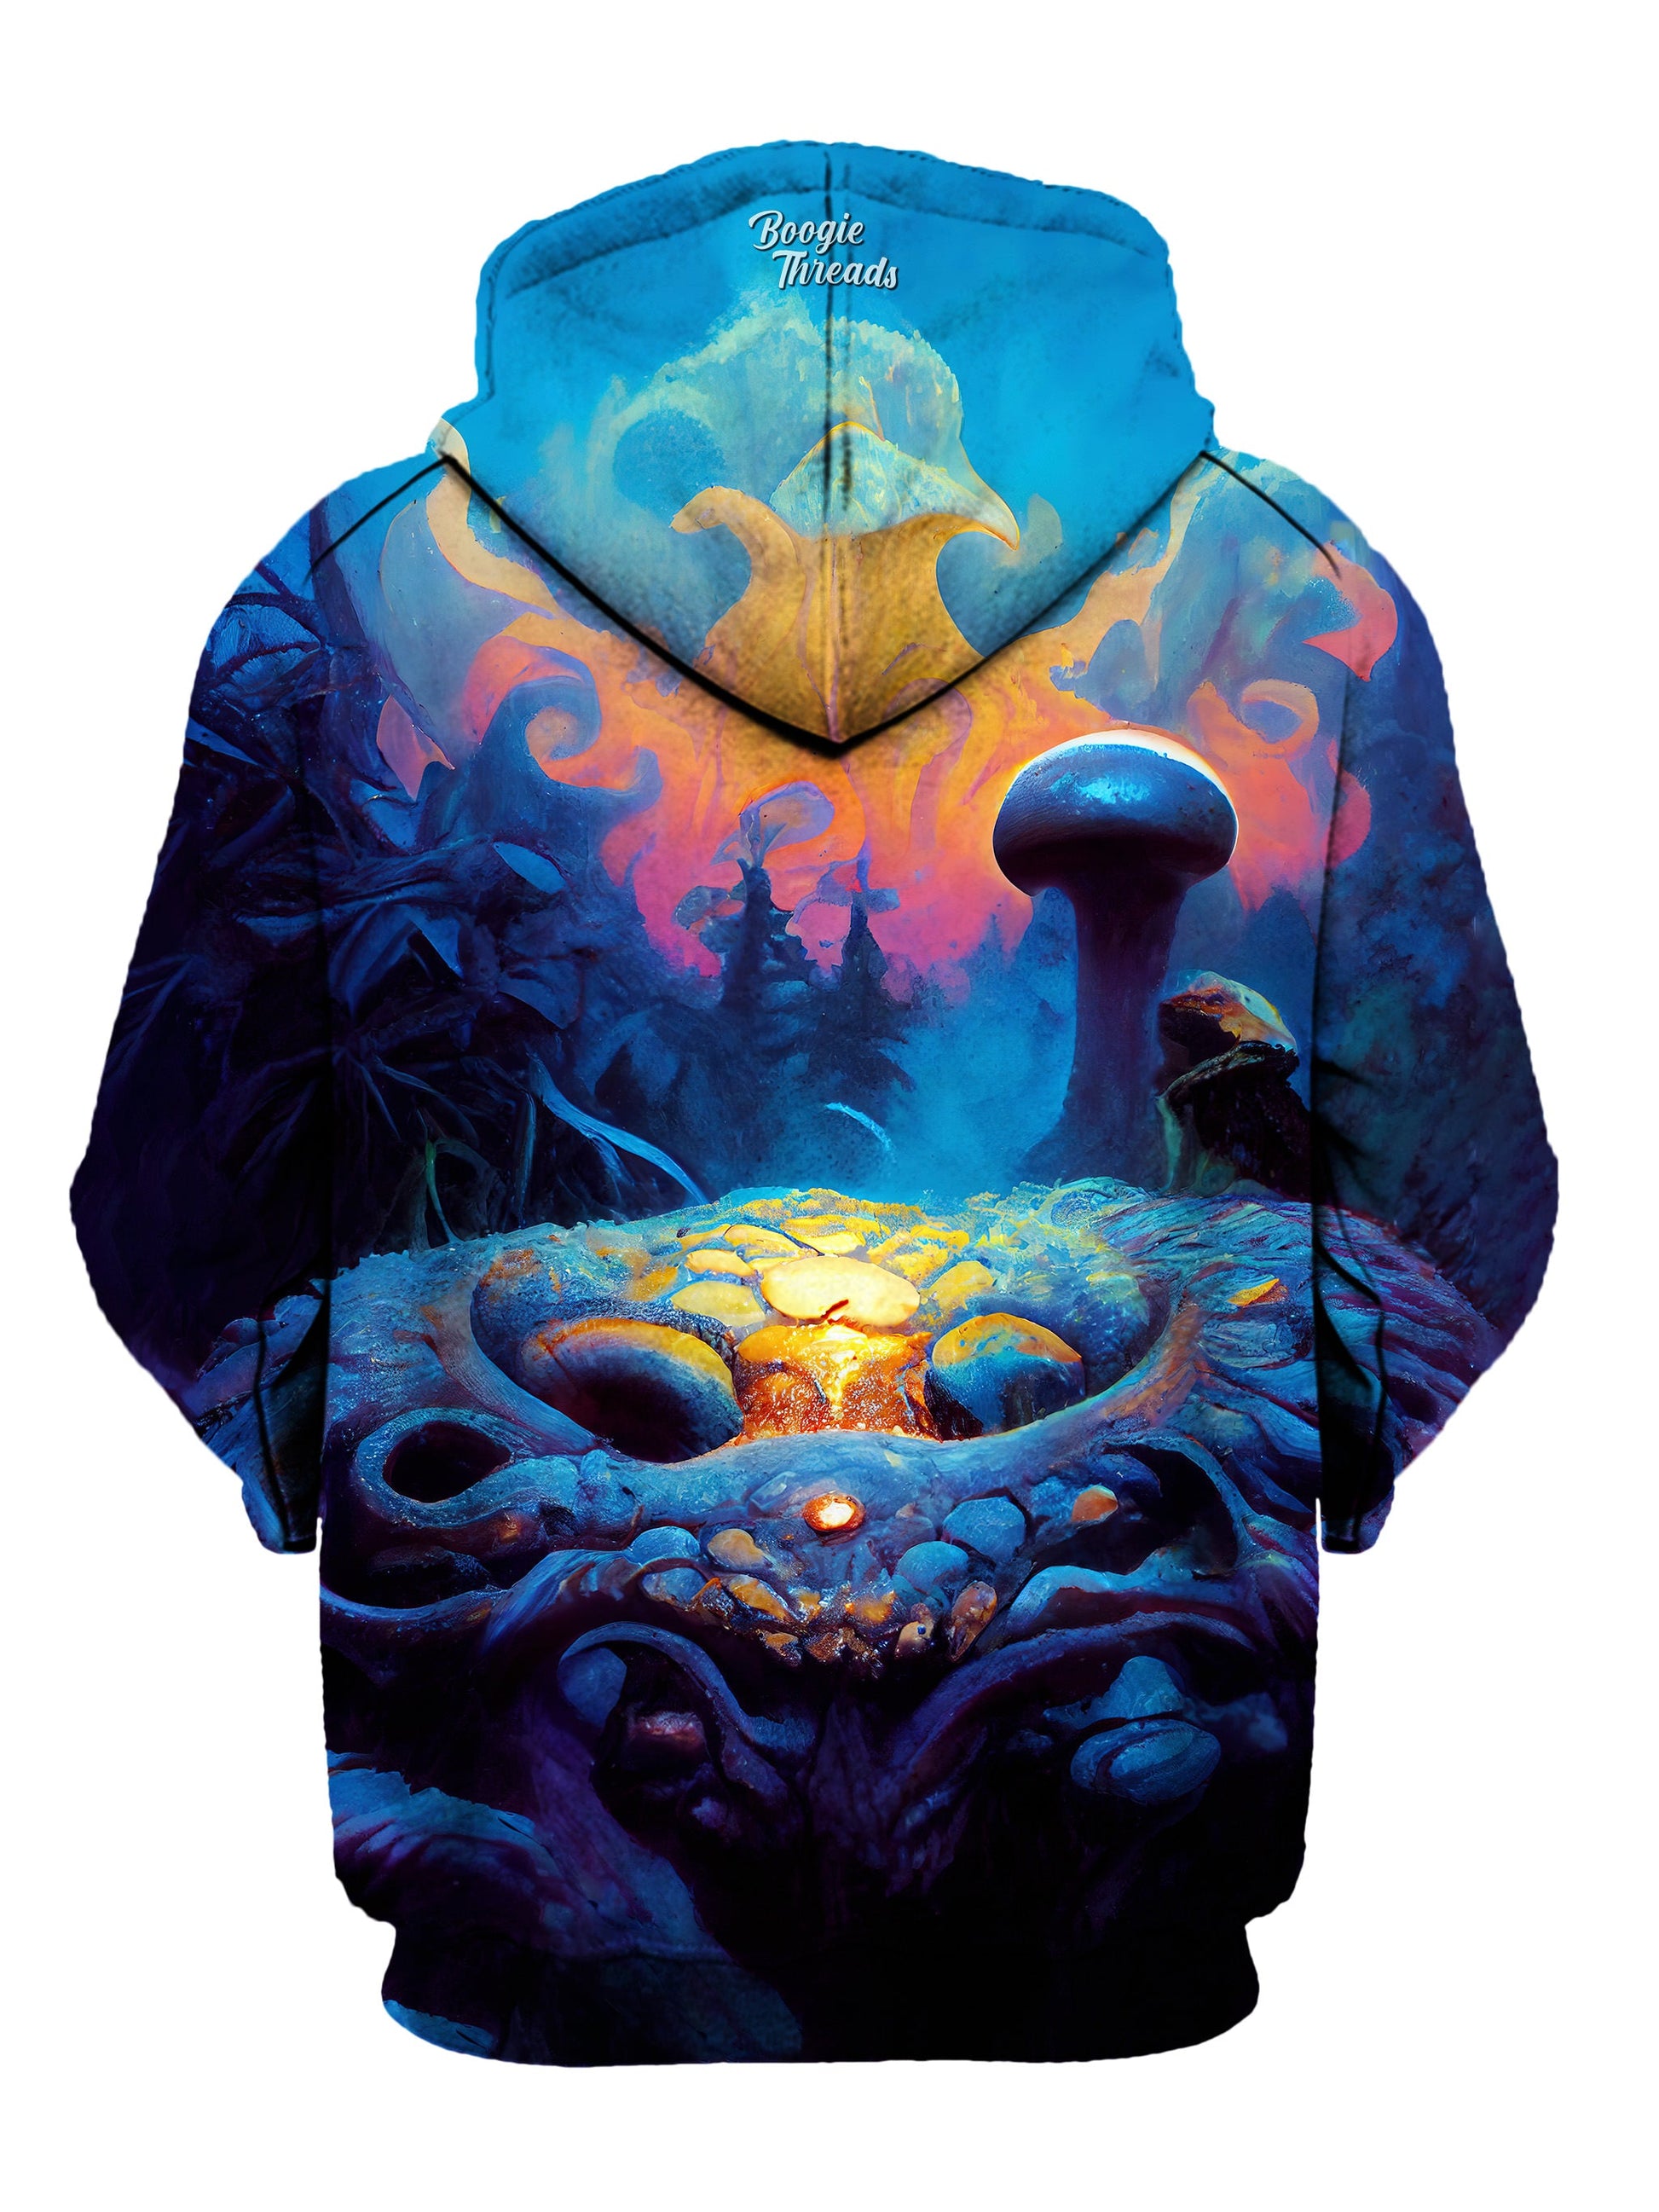 rear view of a printed pullover hoodie with a painted mushroom forest